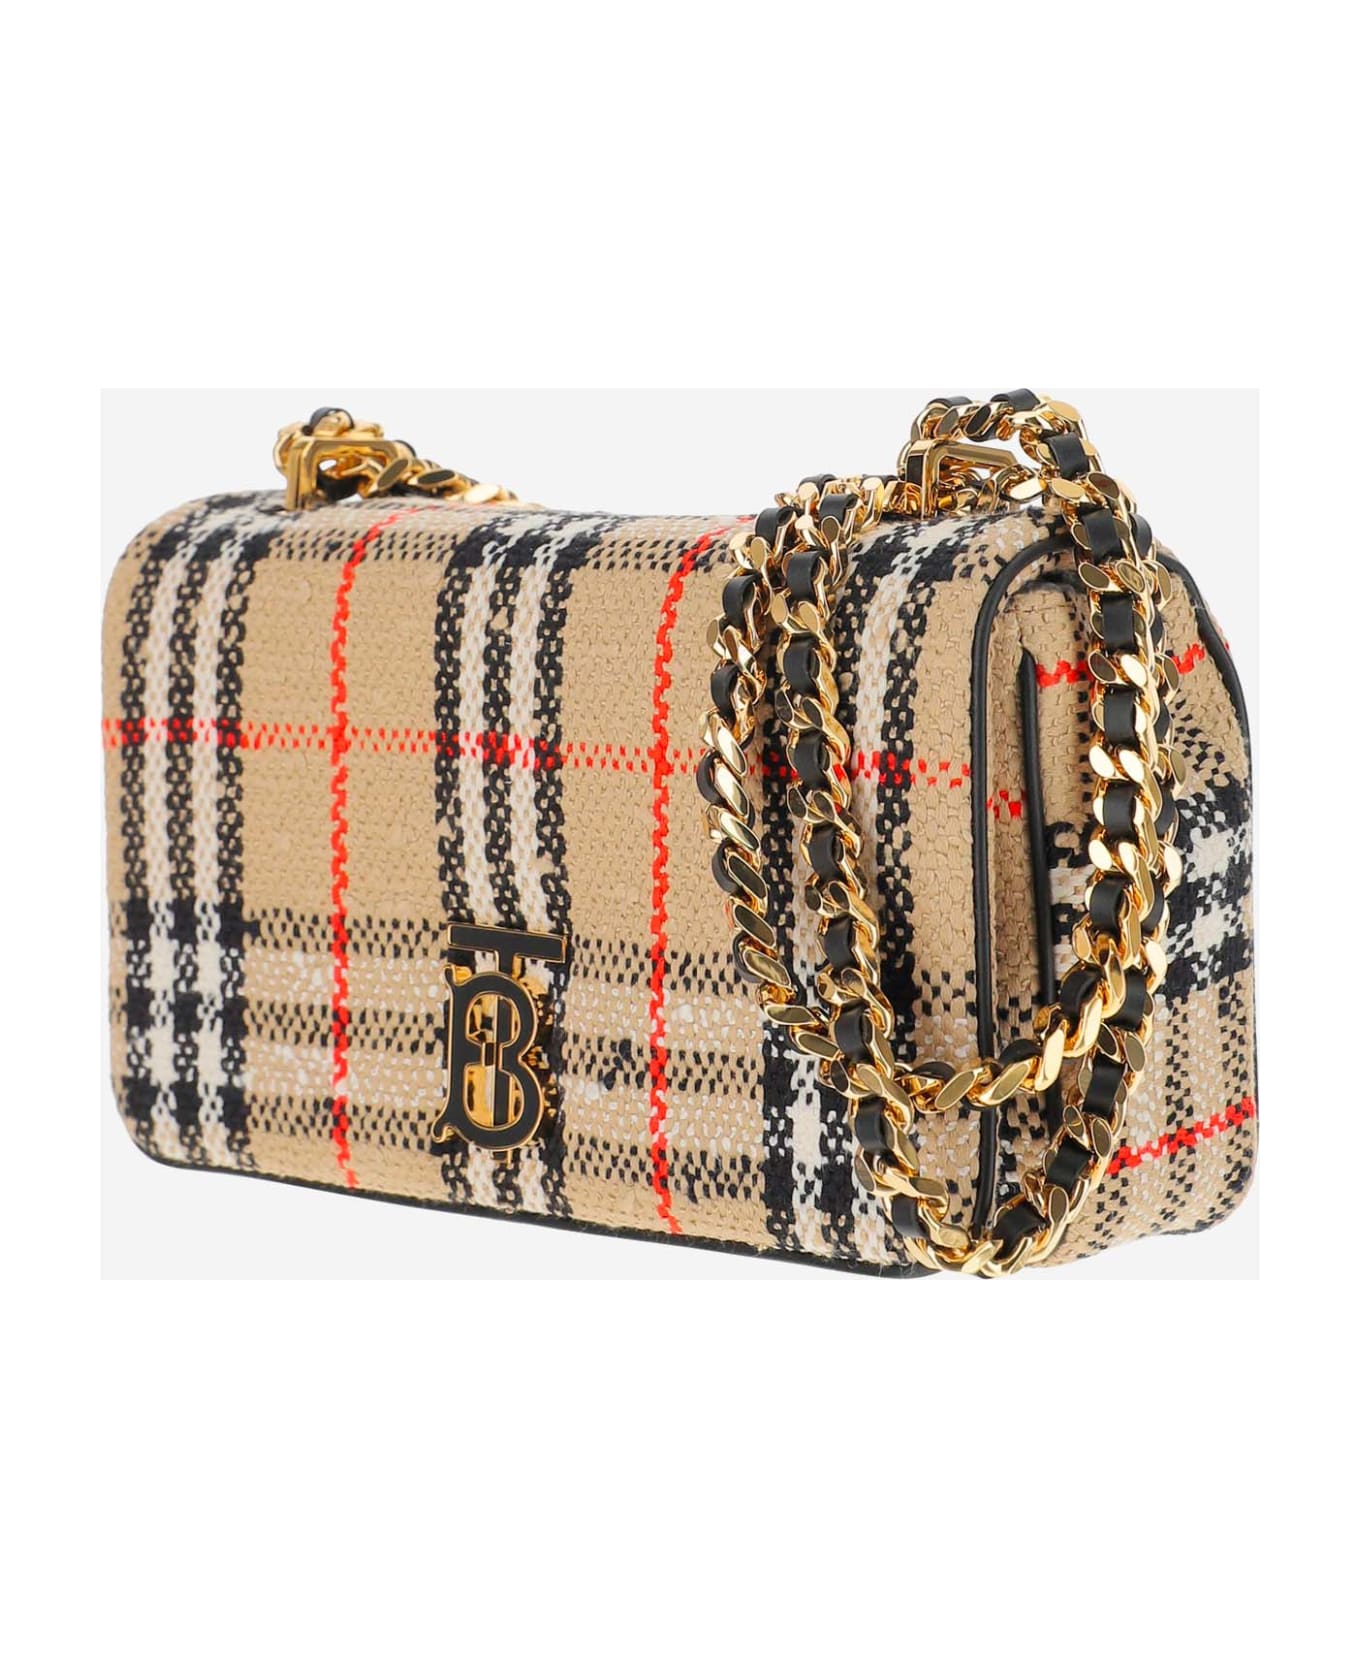 Burberry Lola Small Bouclé Bag With Vintage Check Pattern - Beige